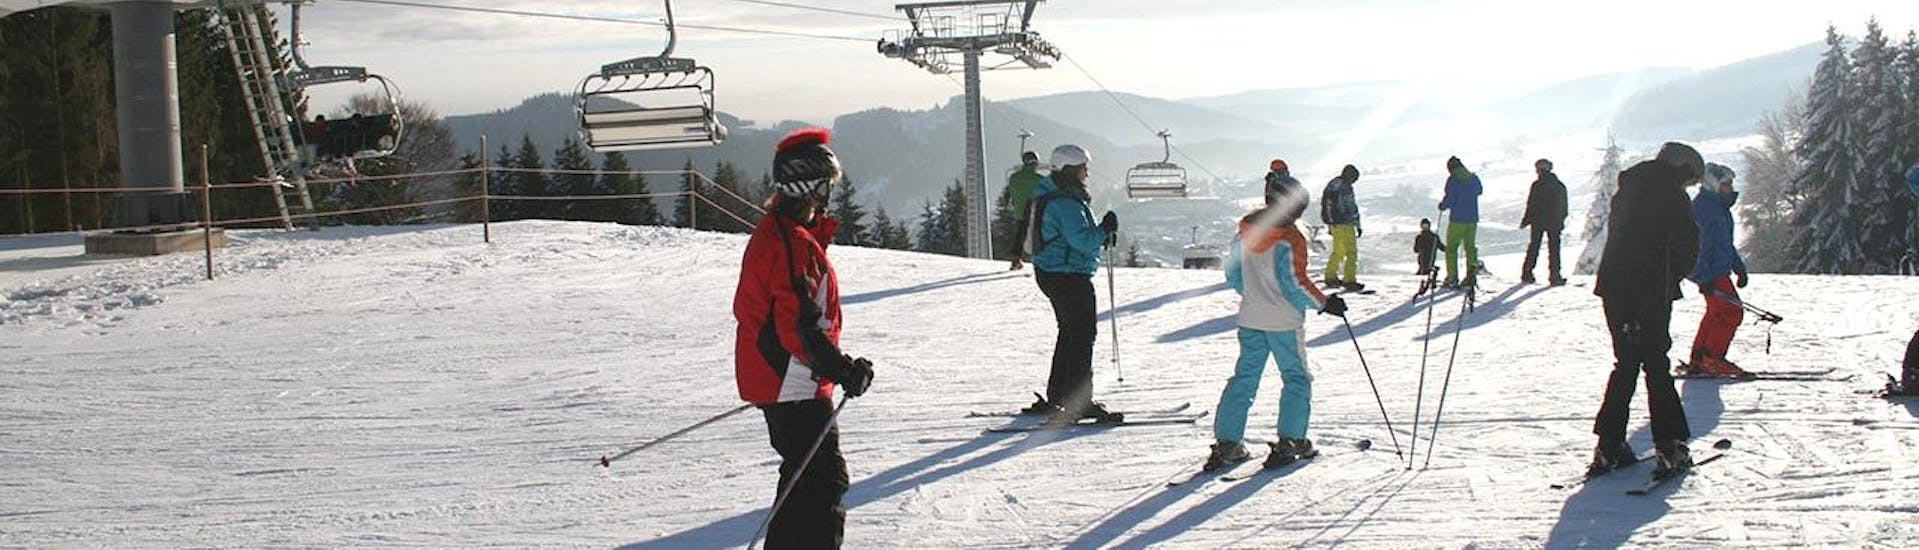 During the Ski Lessons for Teens (13-17 y.) - All Levels - Half Day, a group of teens is enjoying skiing under the supervision of an experienced ski instructor from the ski school Skischule Snow & Bike Factory Willingen.